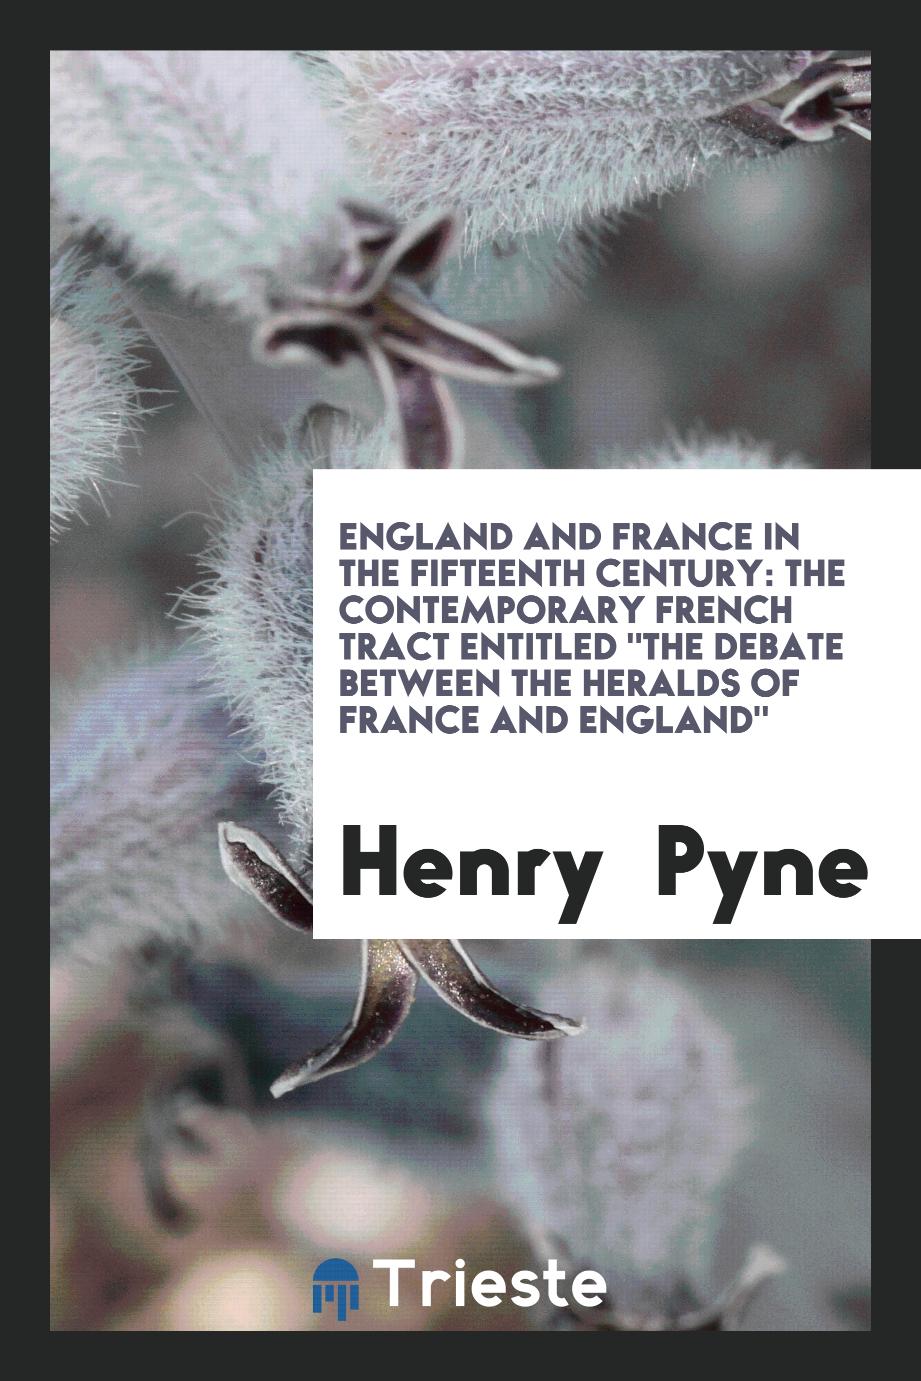 England and France in the Fifteenth Century: The Contemporary French Tract Entitled "The Debate between the Heralds of France and England"